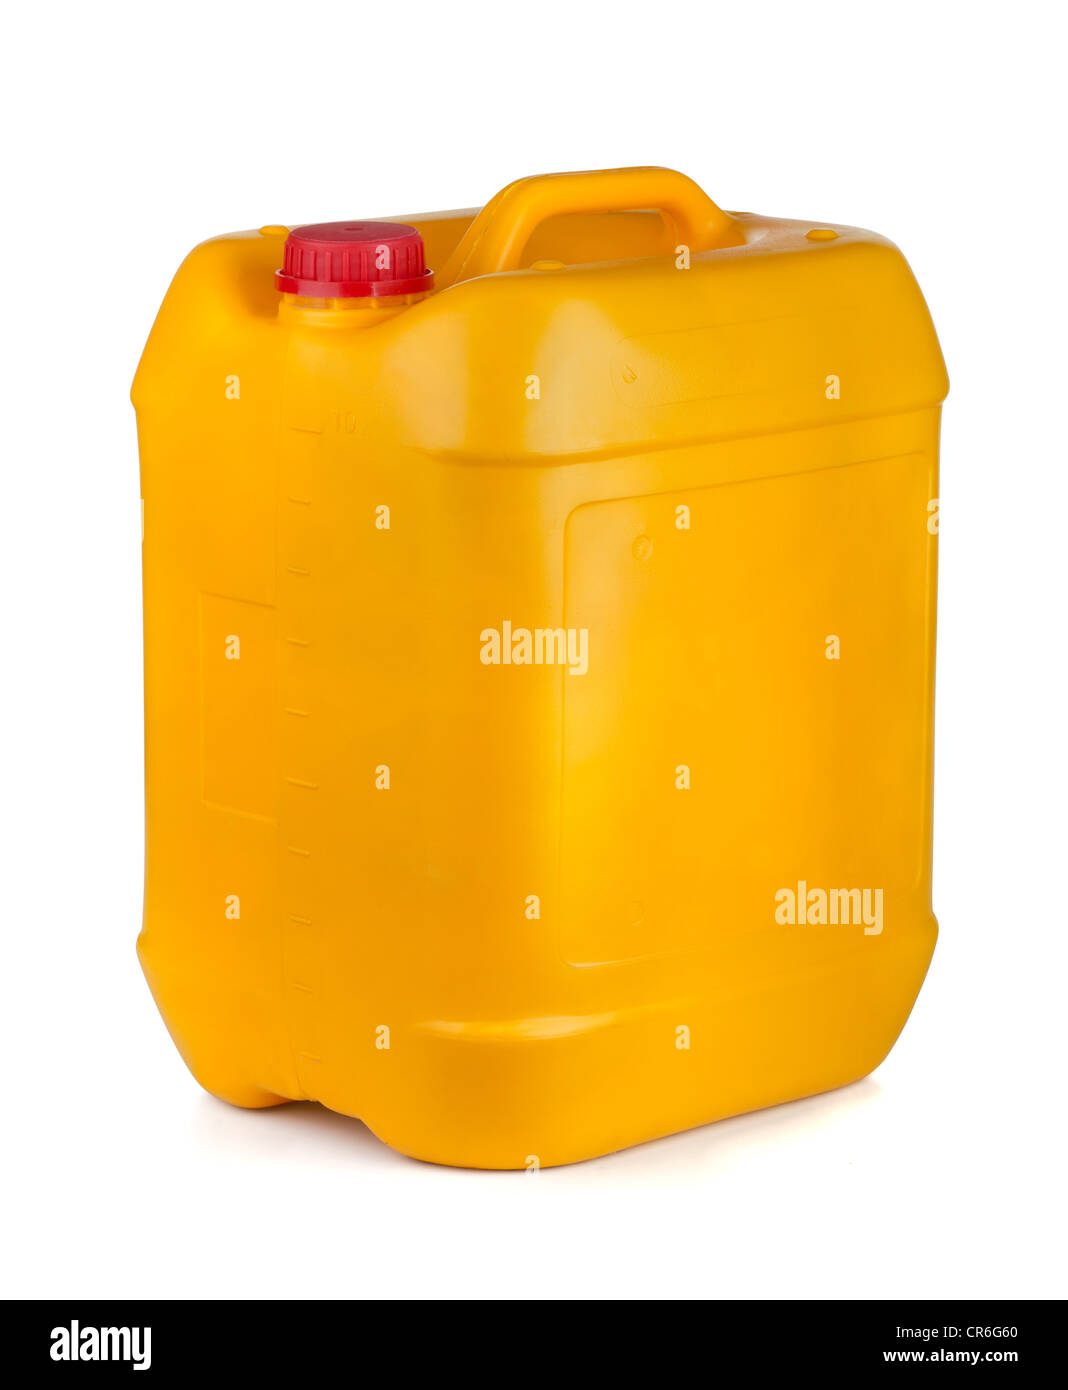 https://c8.alamy.com/comp/CR6G60/yellow-plastic-container-with-lid-and-handle-isolated-on-white-CR6G60.jpg